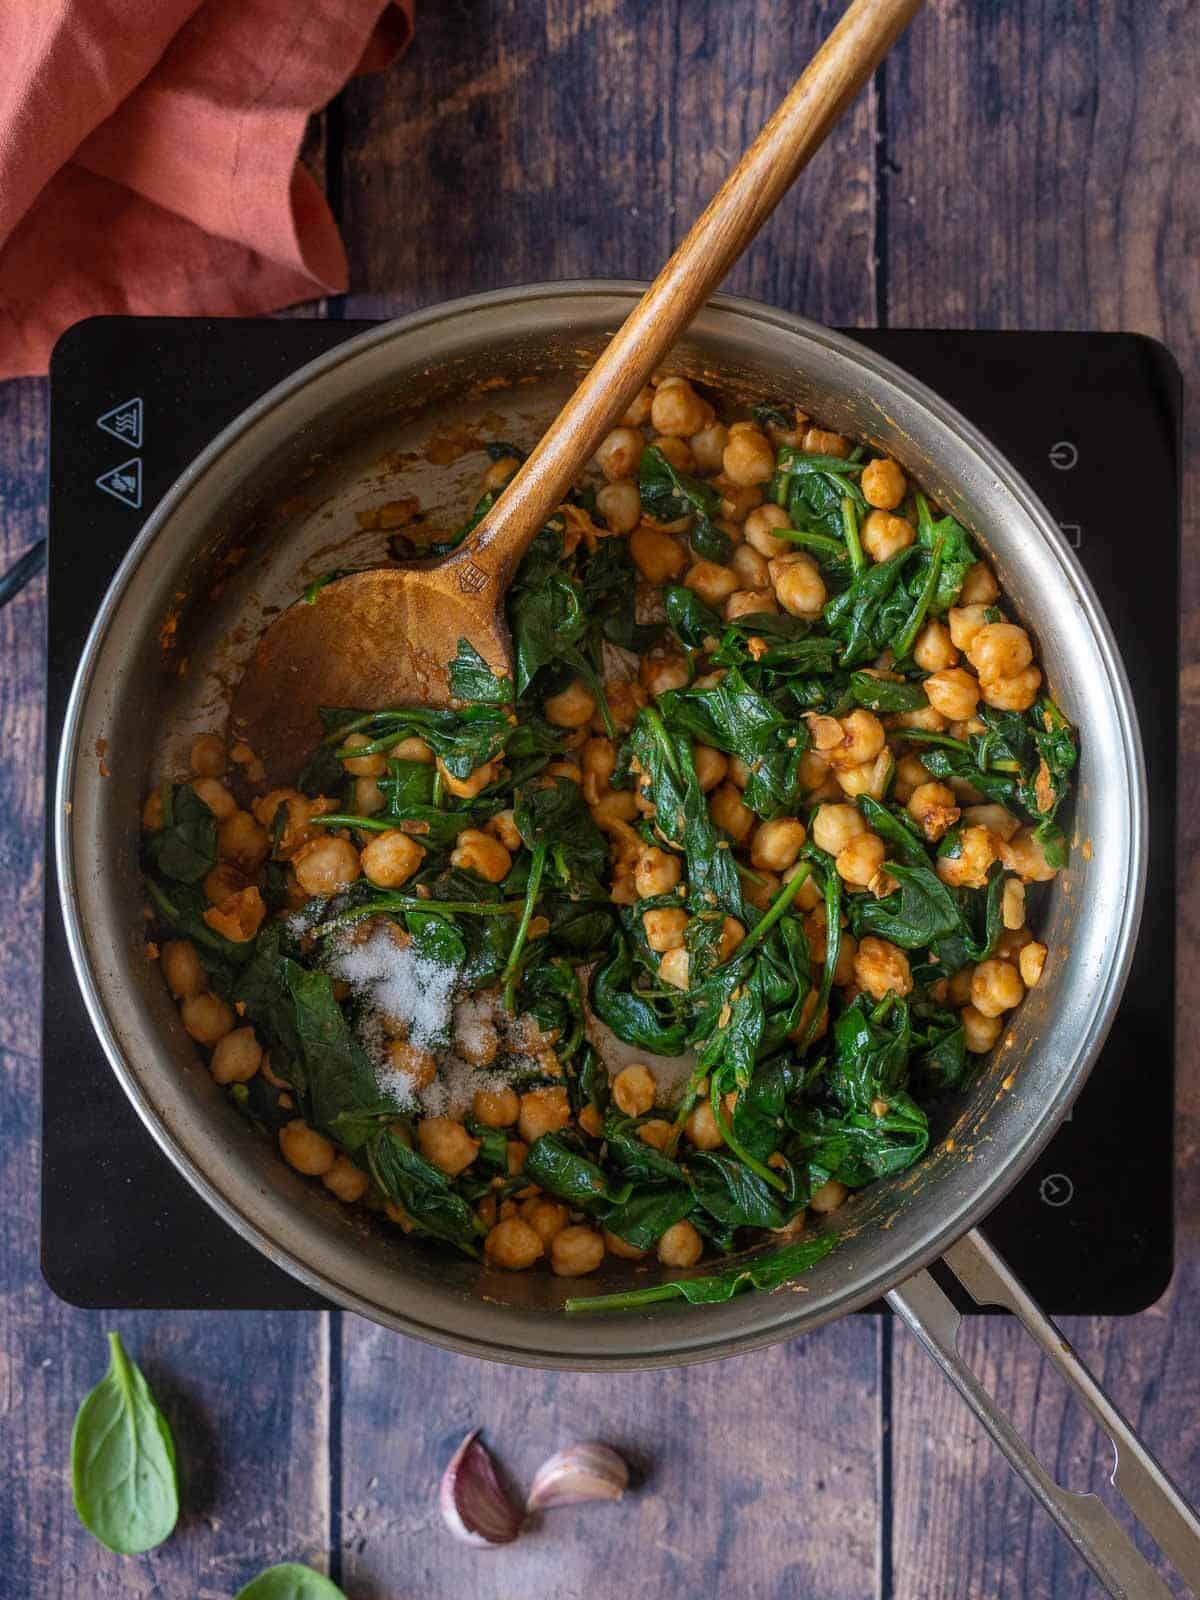 stirring wilted spinach with chickpeas.